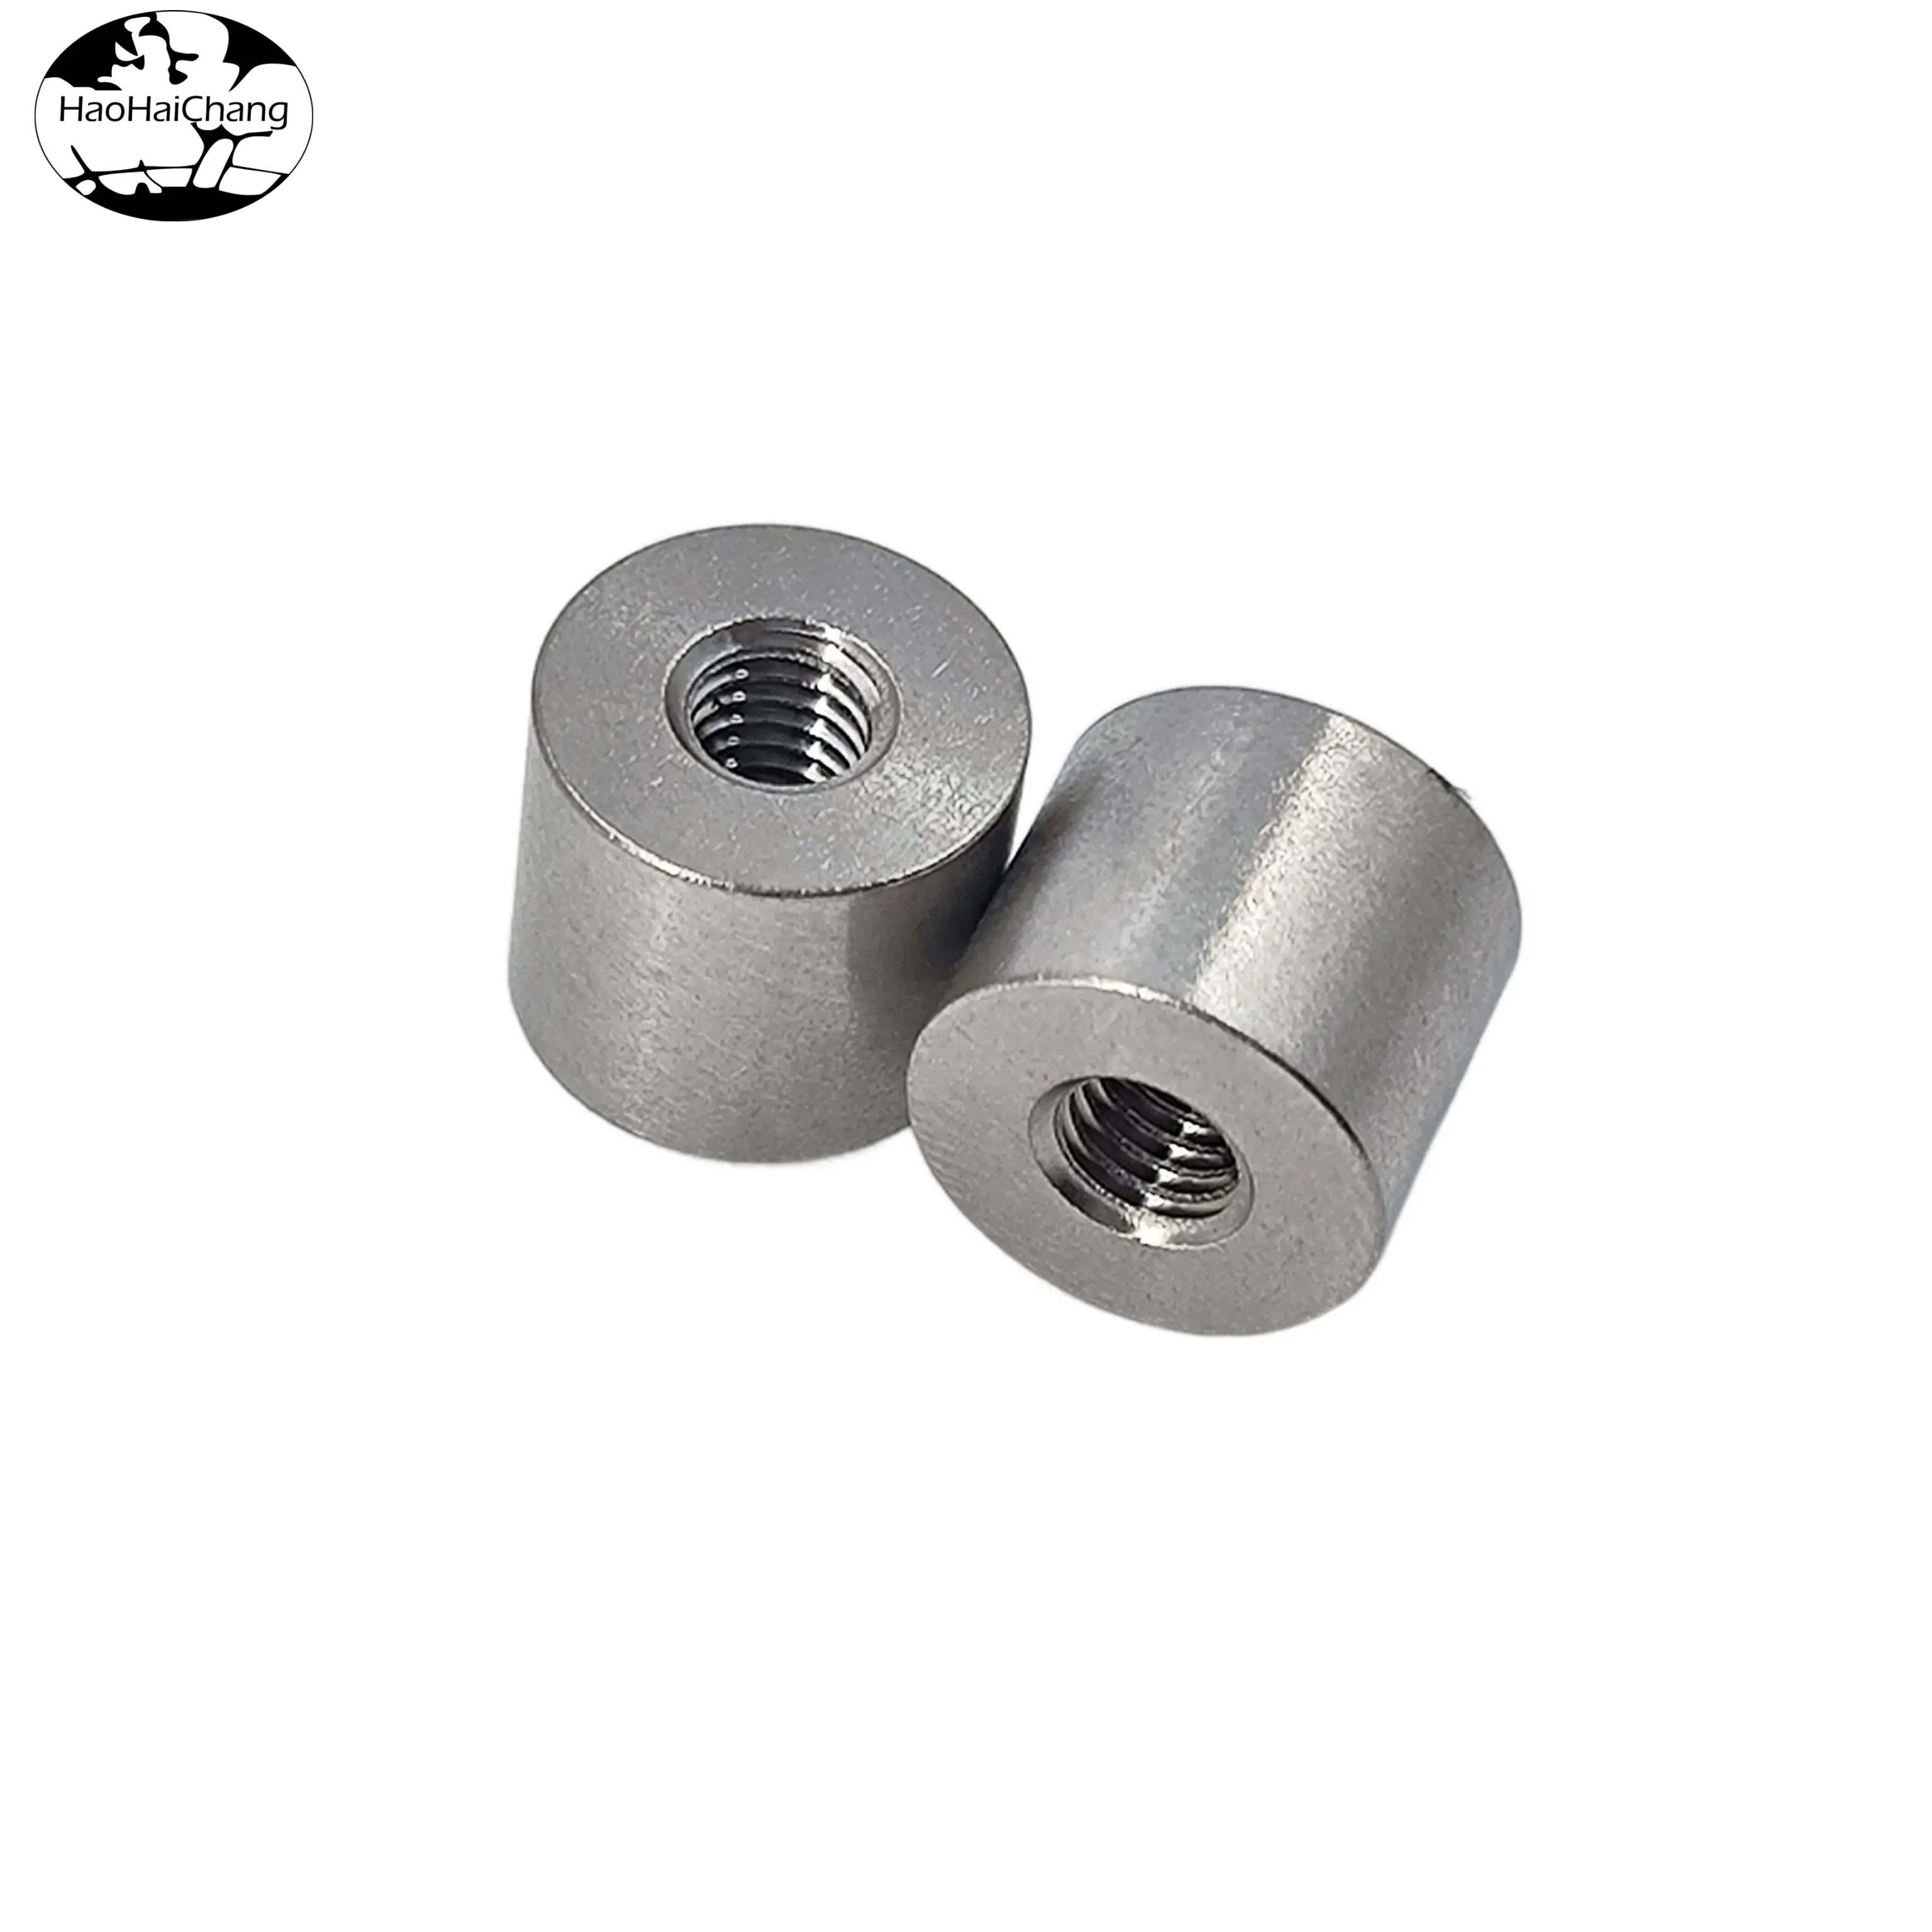 HHC-471 Stainless Steel Internal Thread Studs Cylindrical Nuts